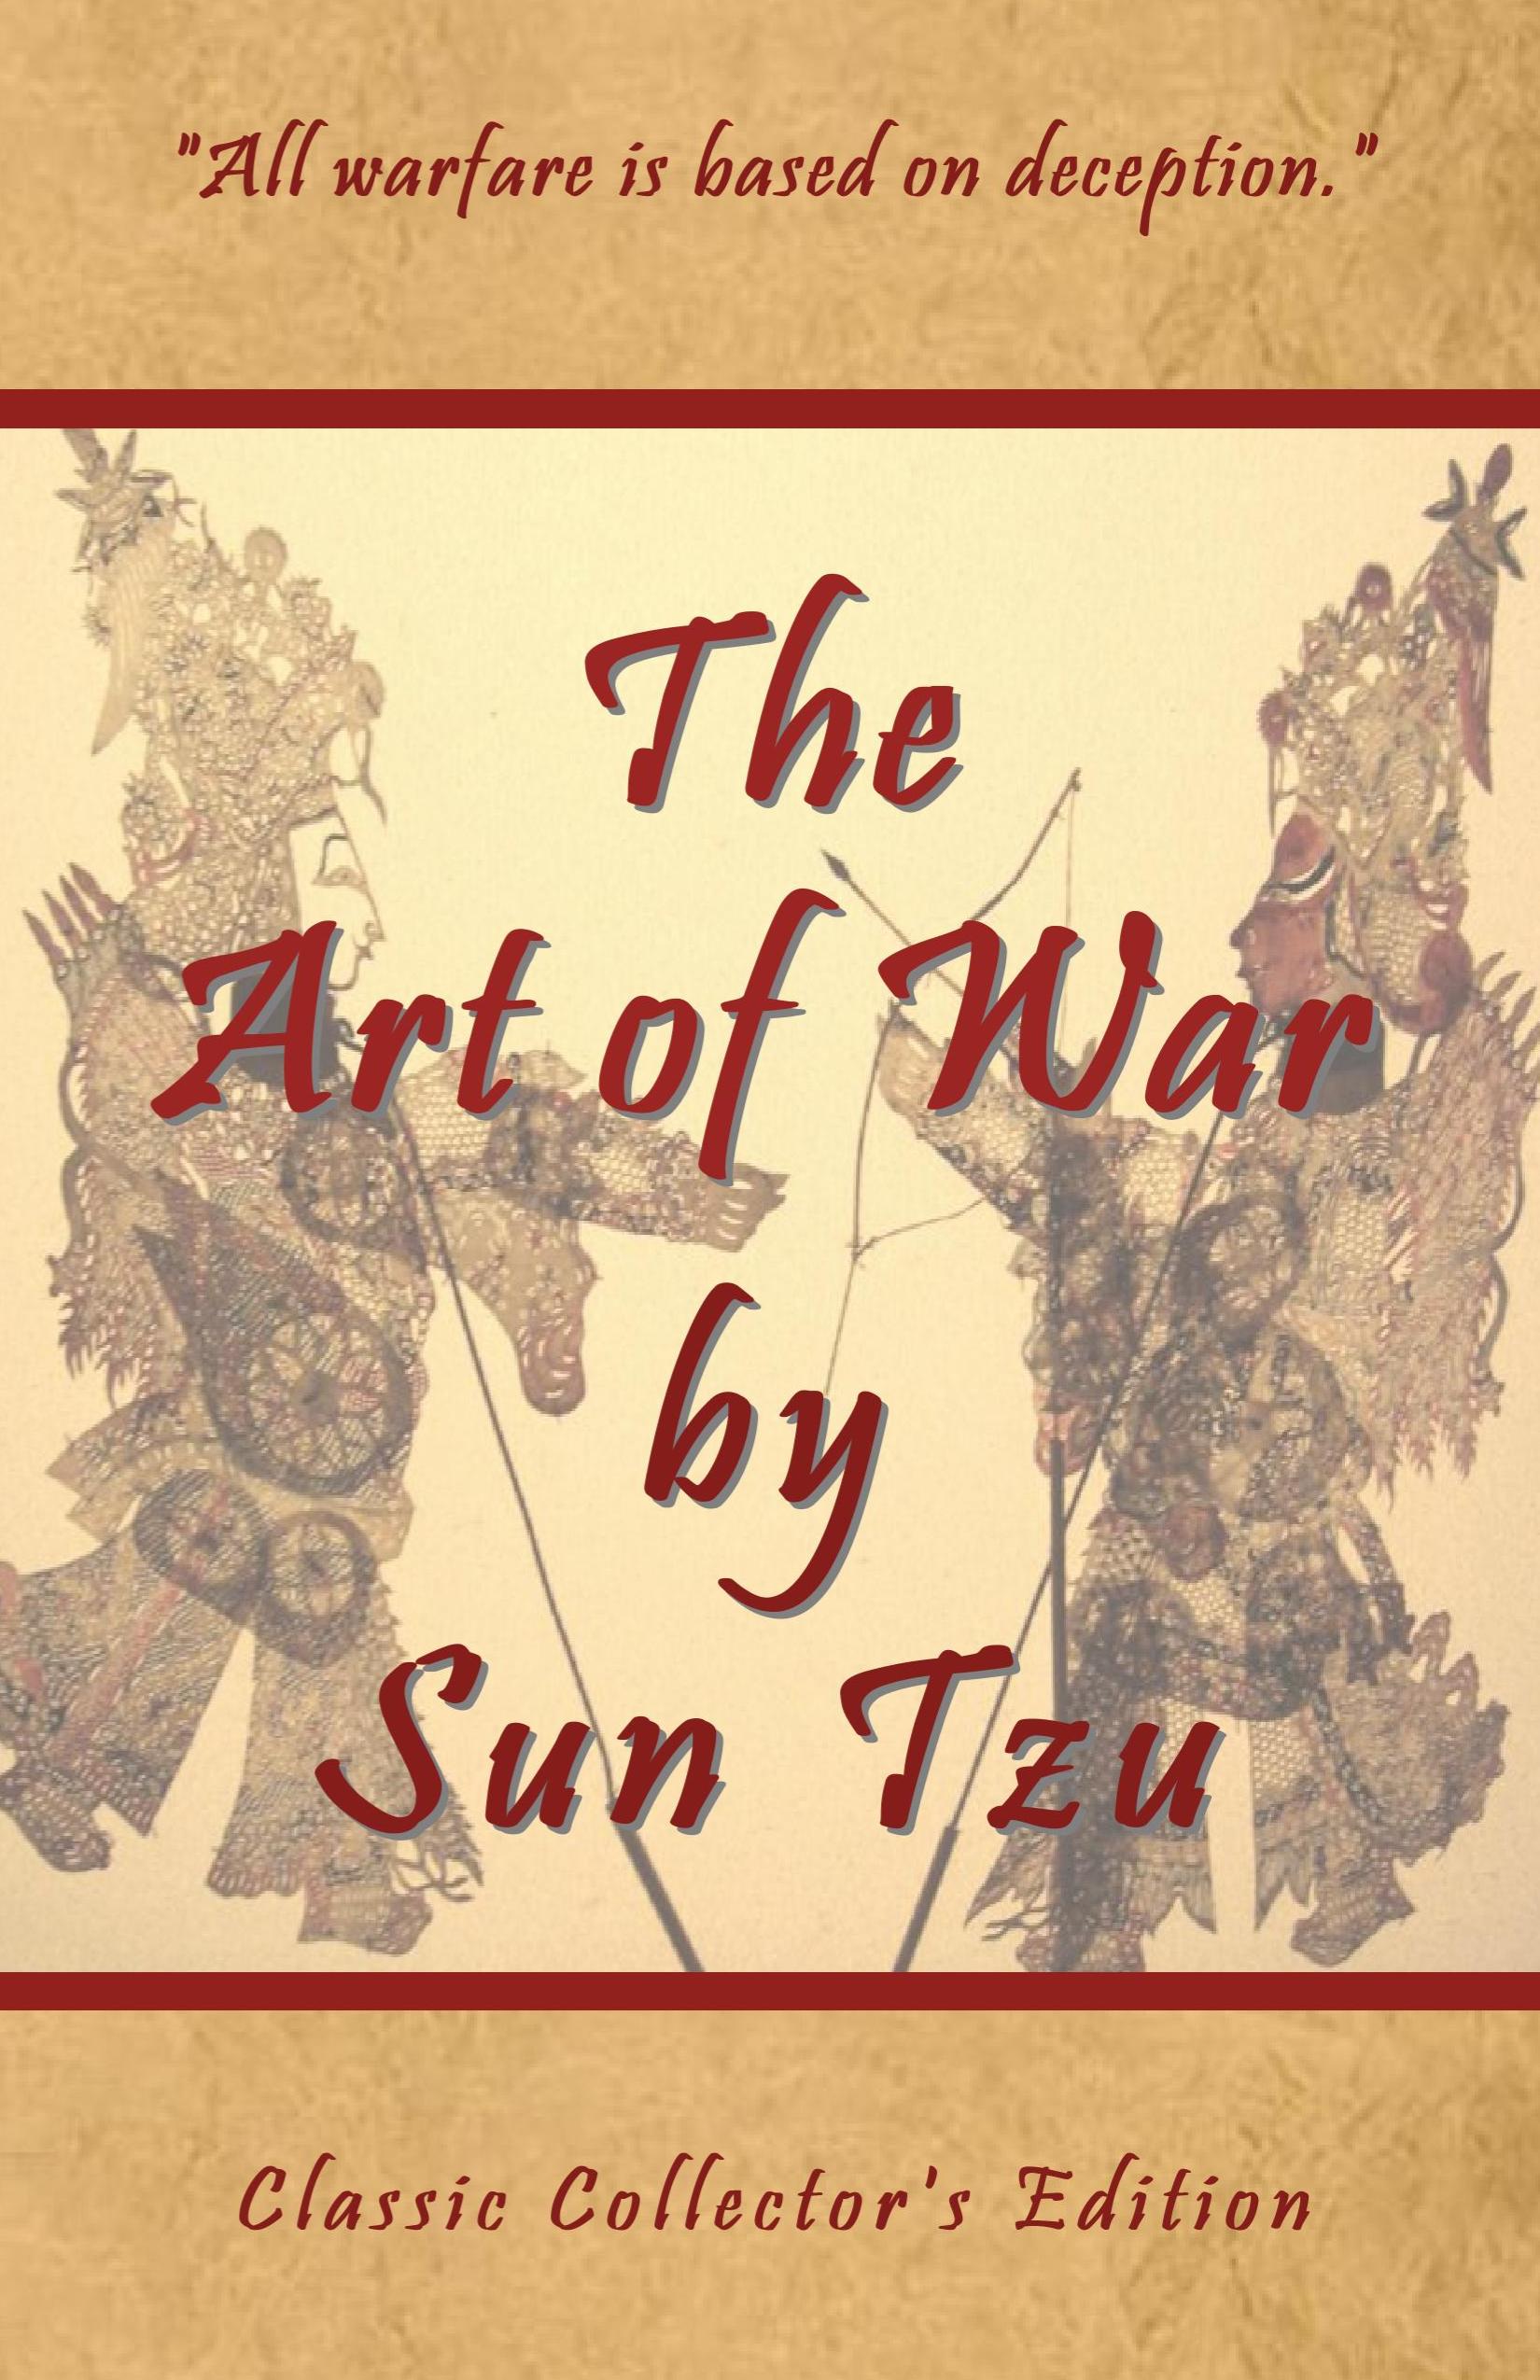 The Art of War by Sun Tzu - Classic Collector's Edition